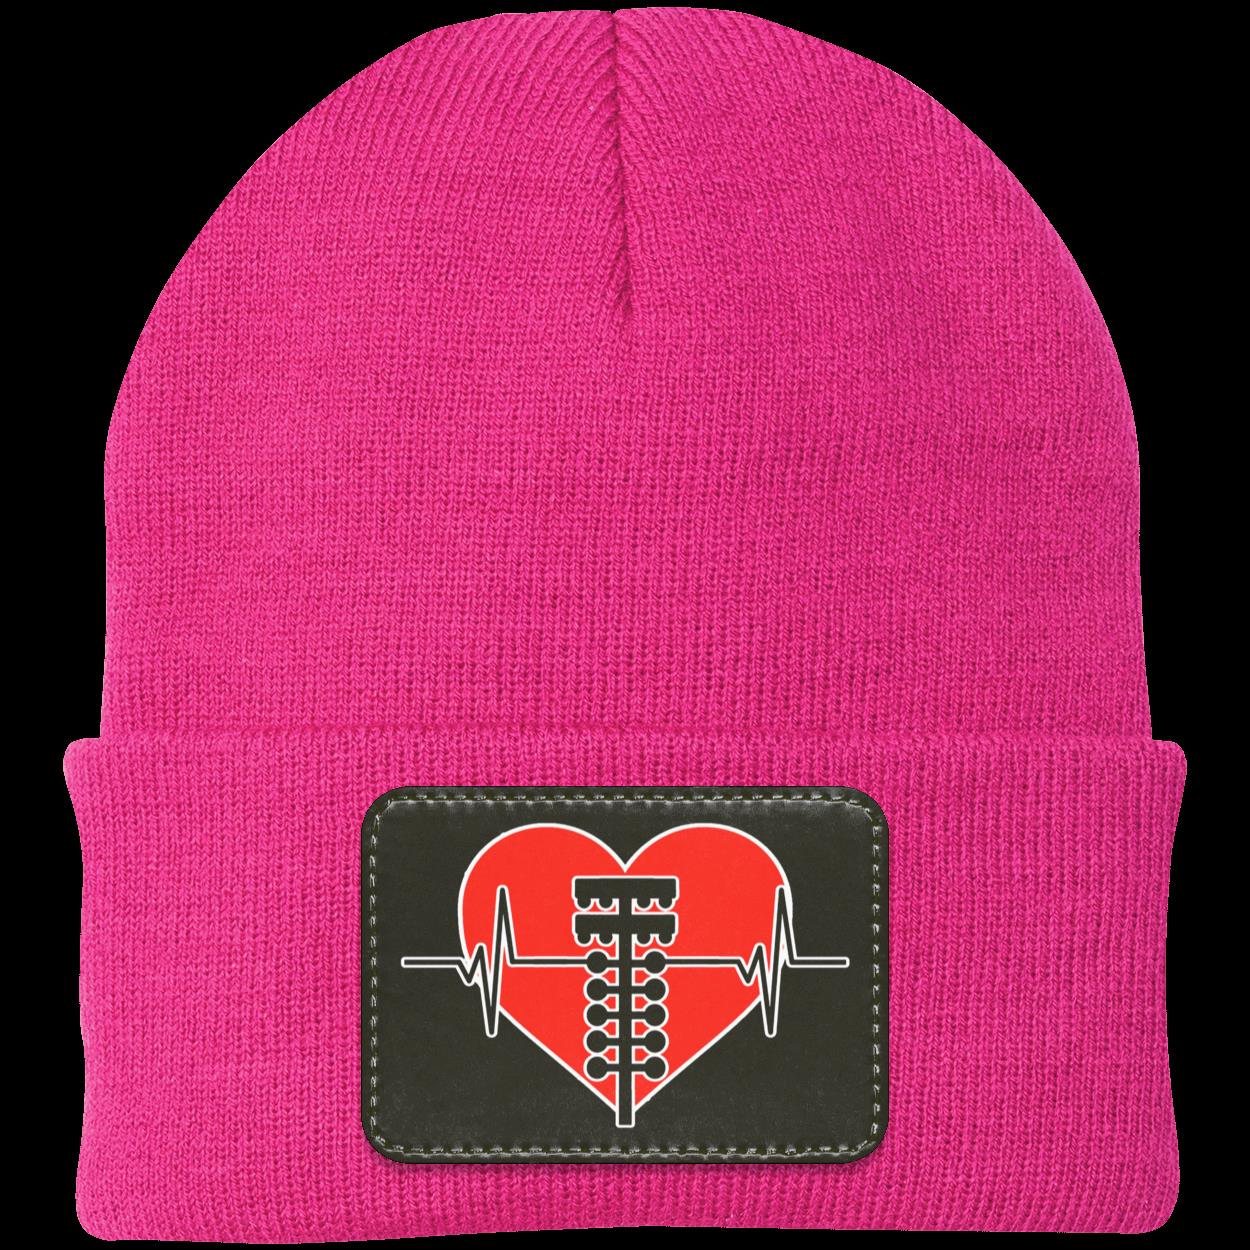 Drag Racing Heartbeat Patched Knit Cap V2